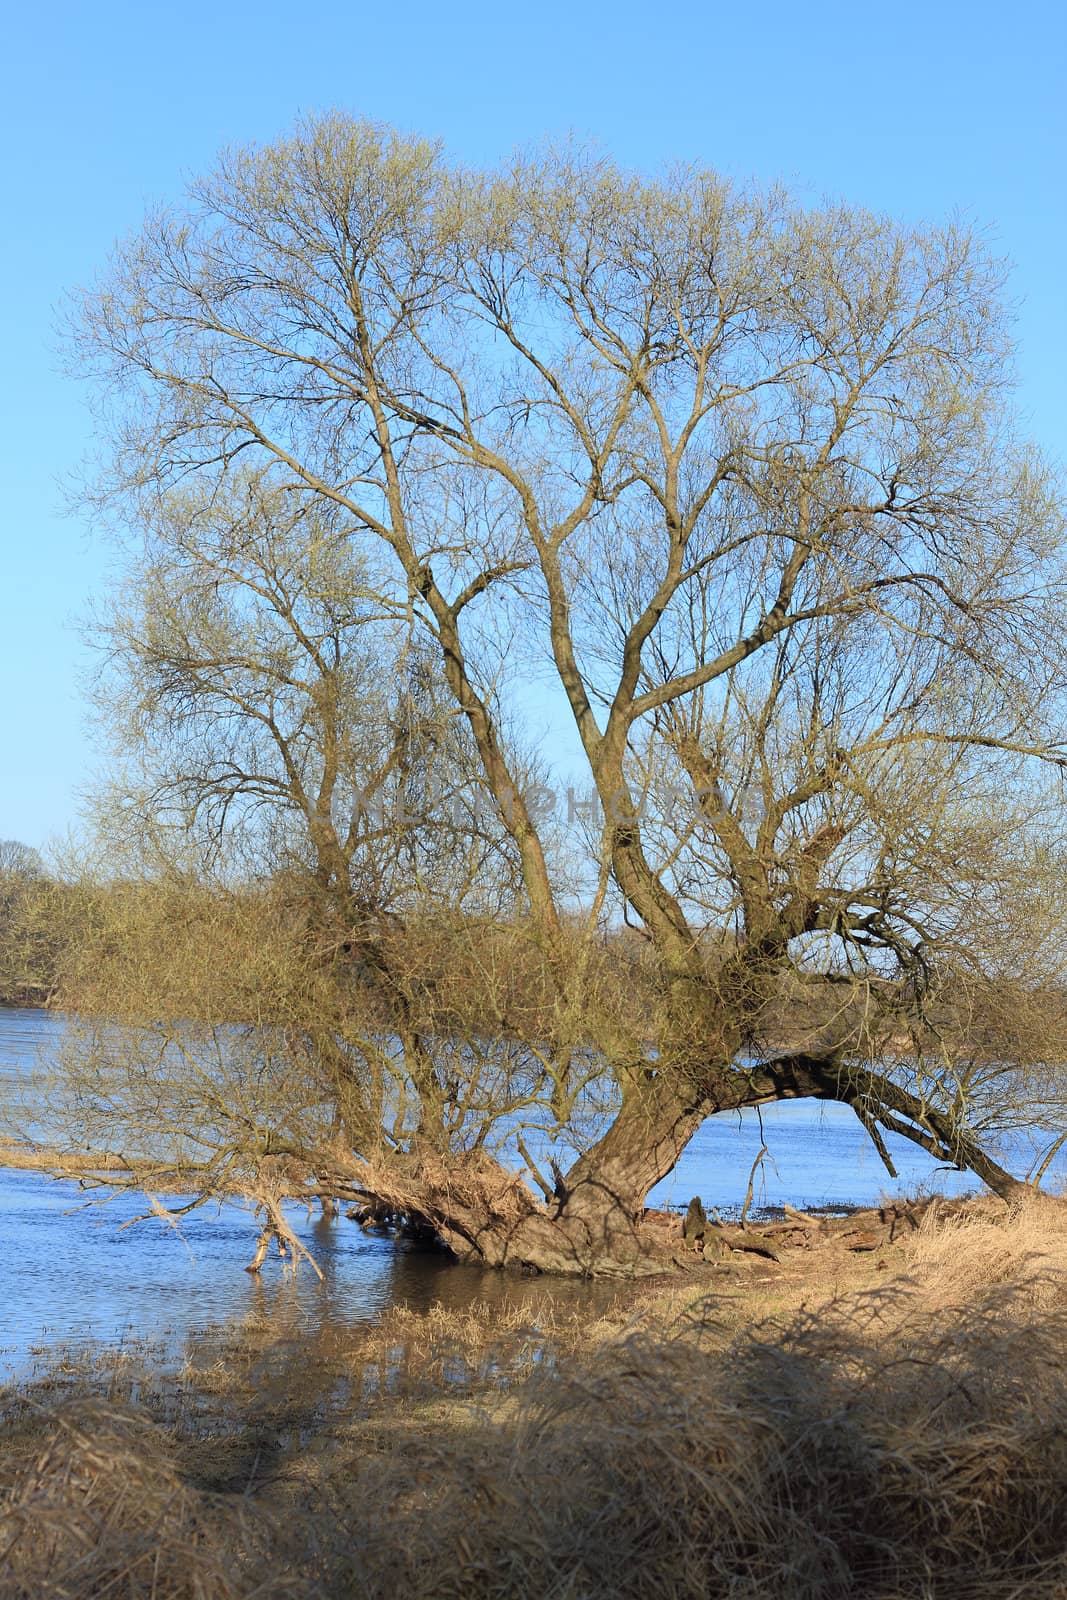 Willows in a floodplain in early spring